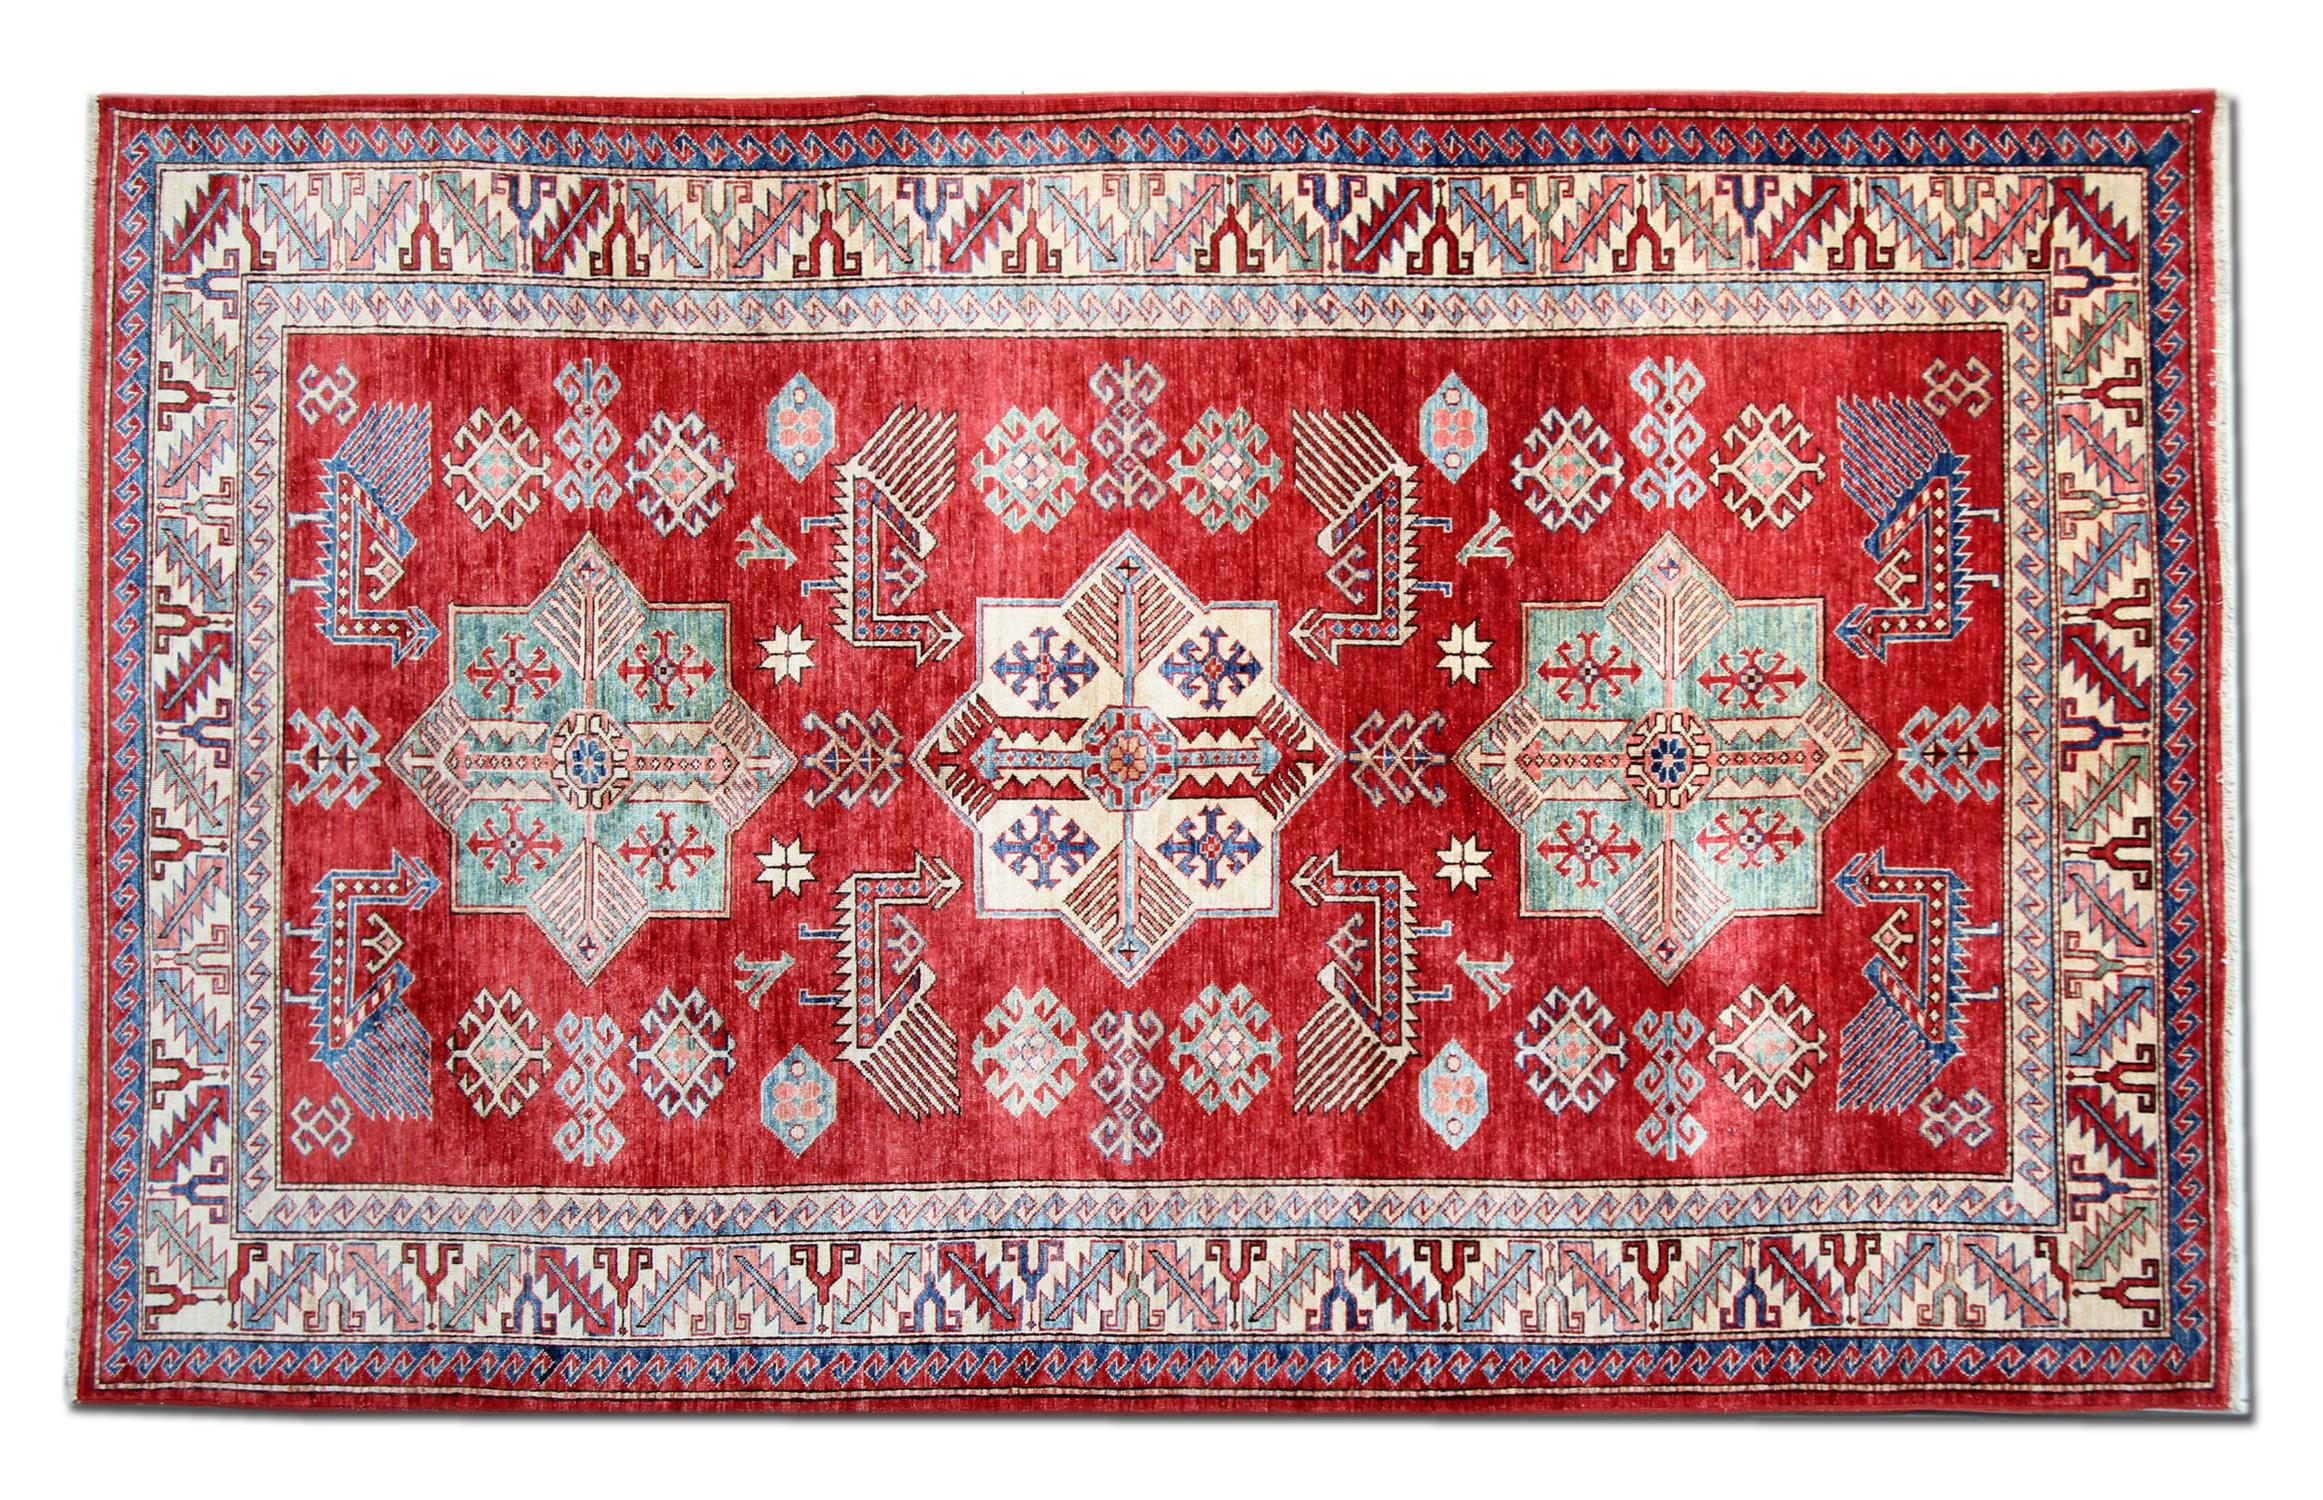 This Kazak red rug has a traditional border with three medallions. The central area of this tribal rug symbolises a garden of paradise protected by the 'walls' of geometric rug patterns, including a few peacocks. Traditional rugs would complement